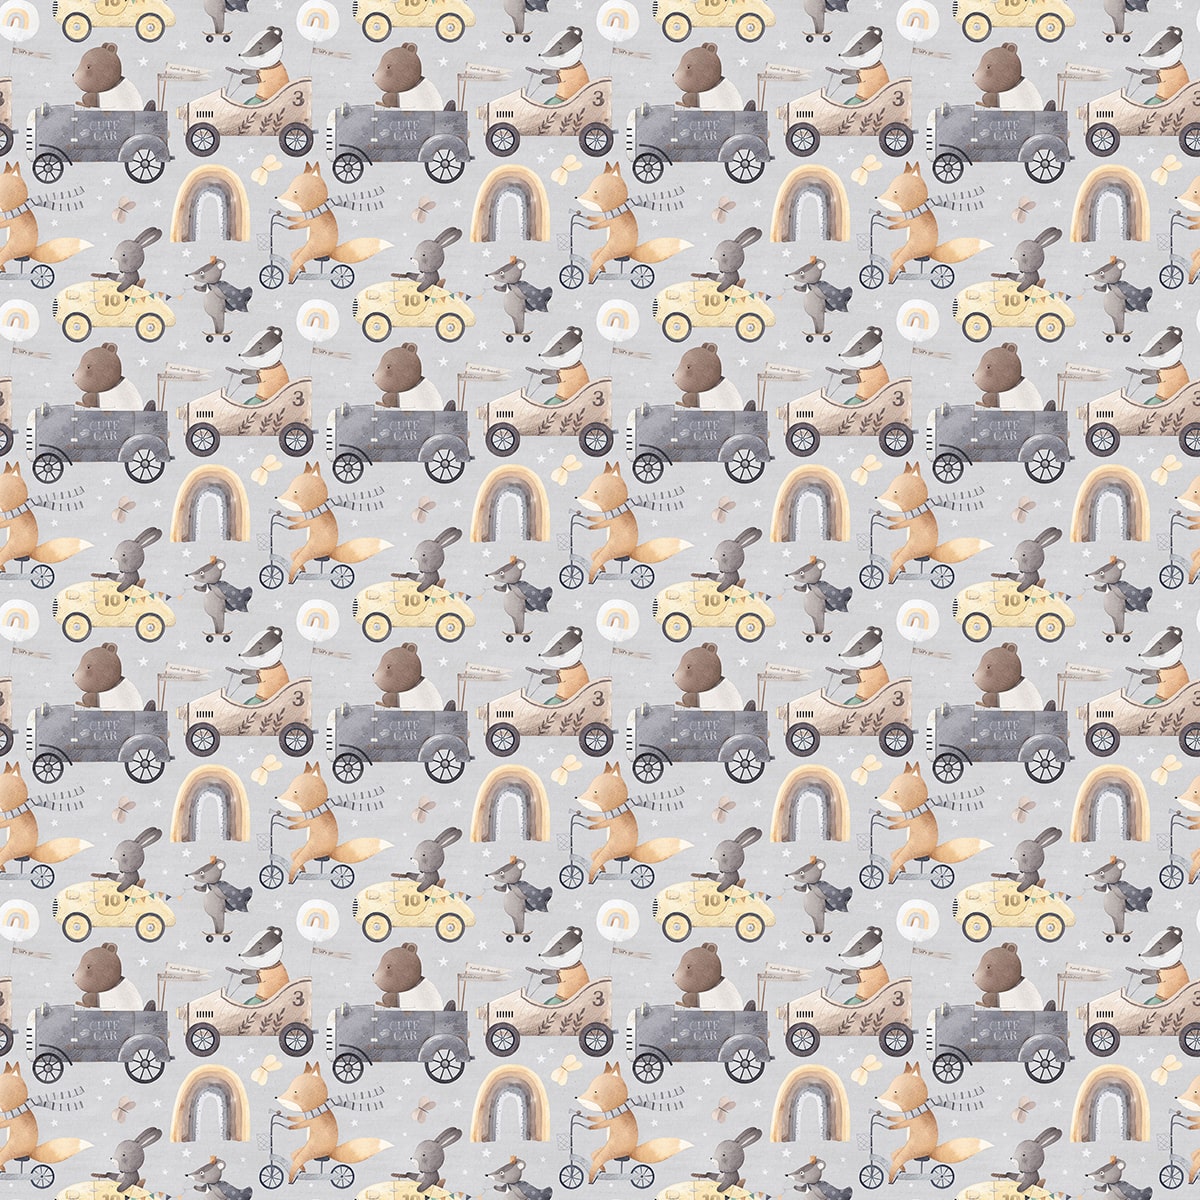 A pattern of animals on a grey background